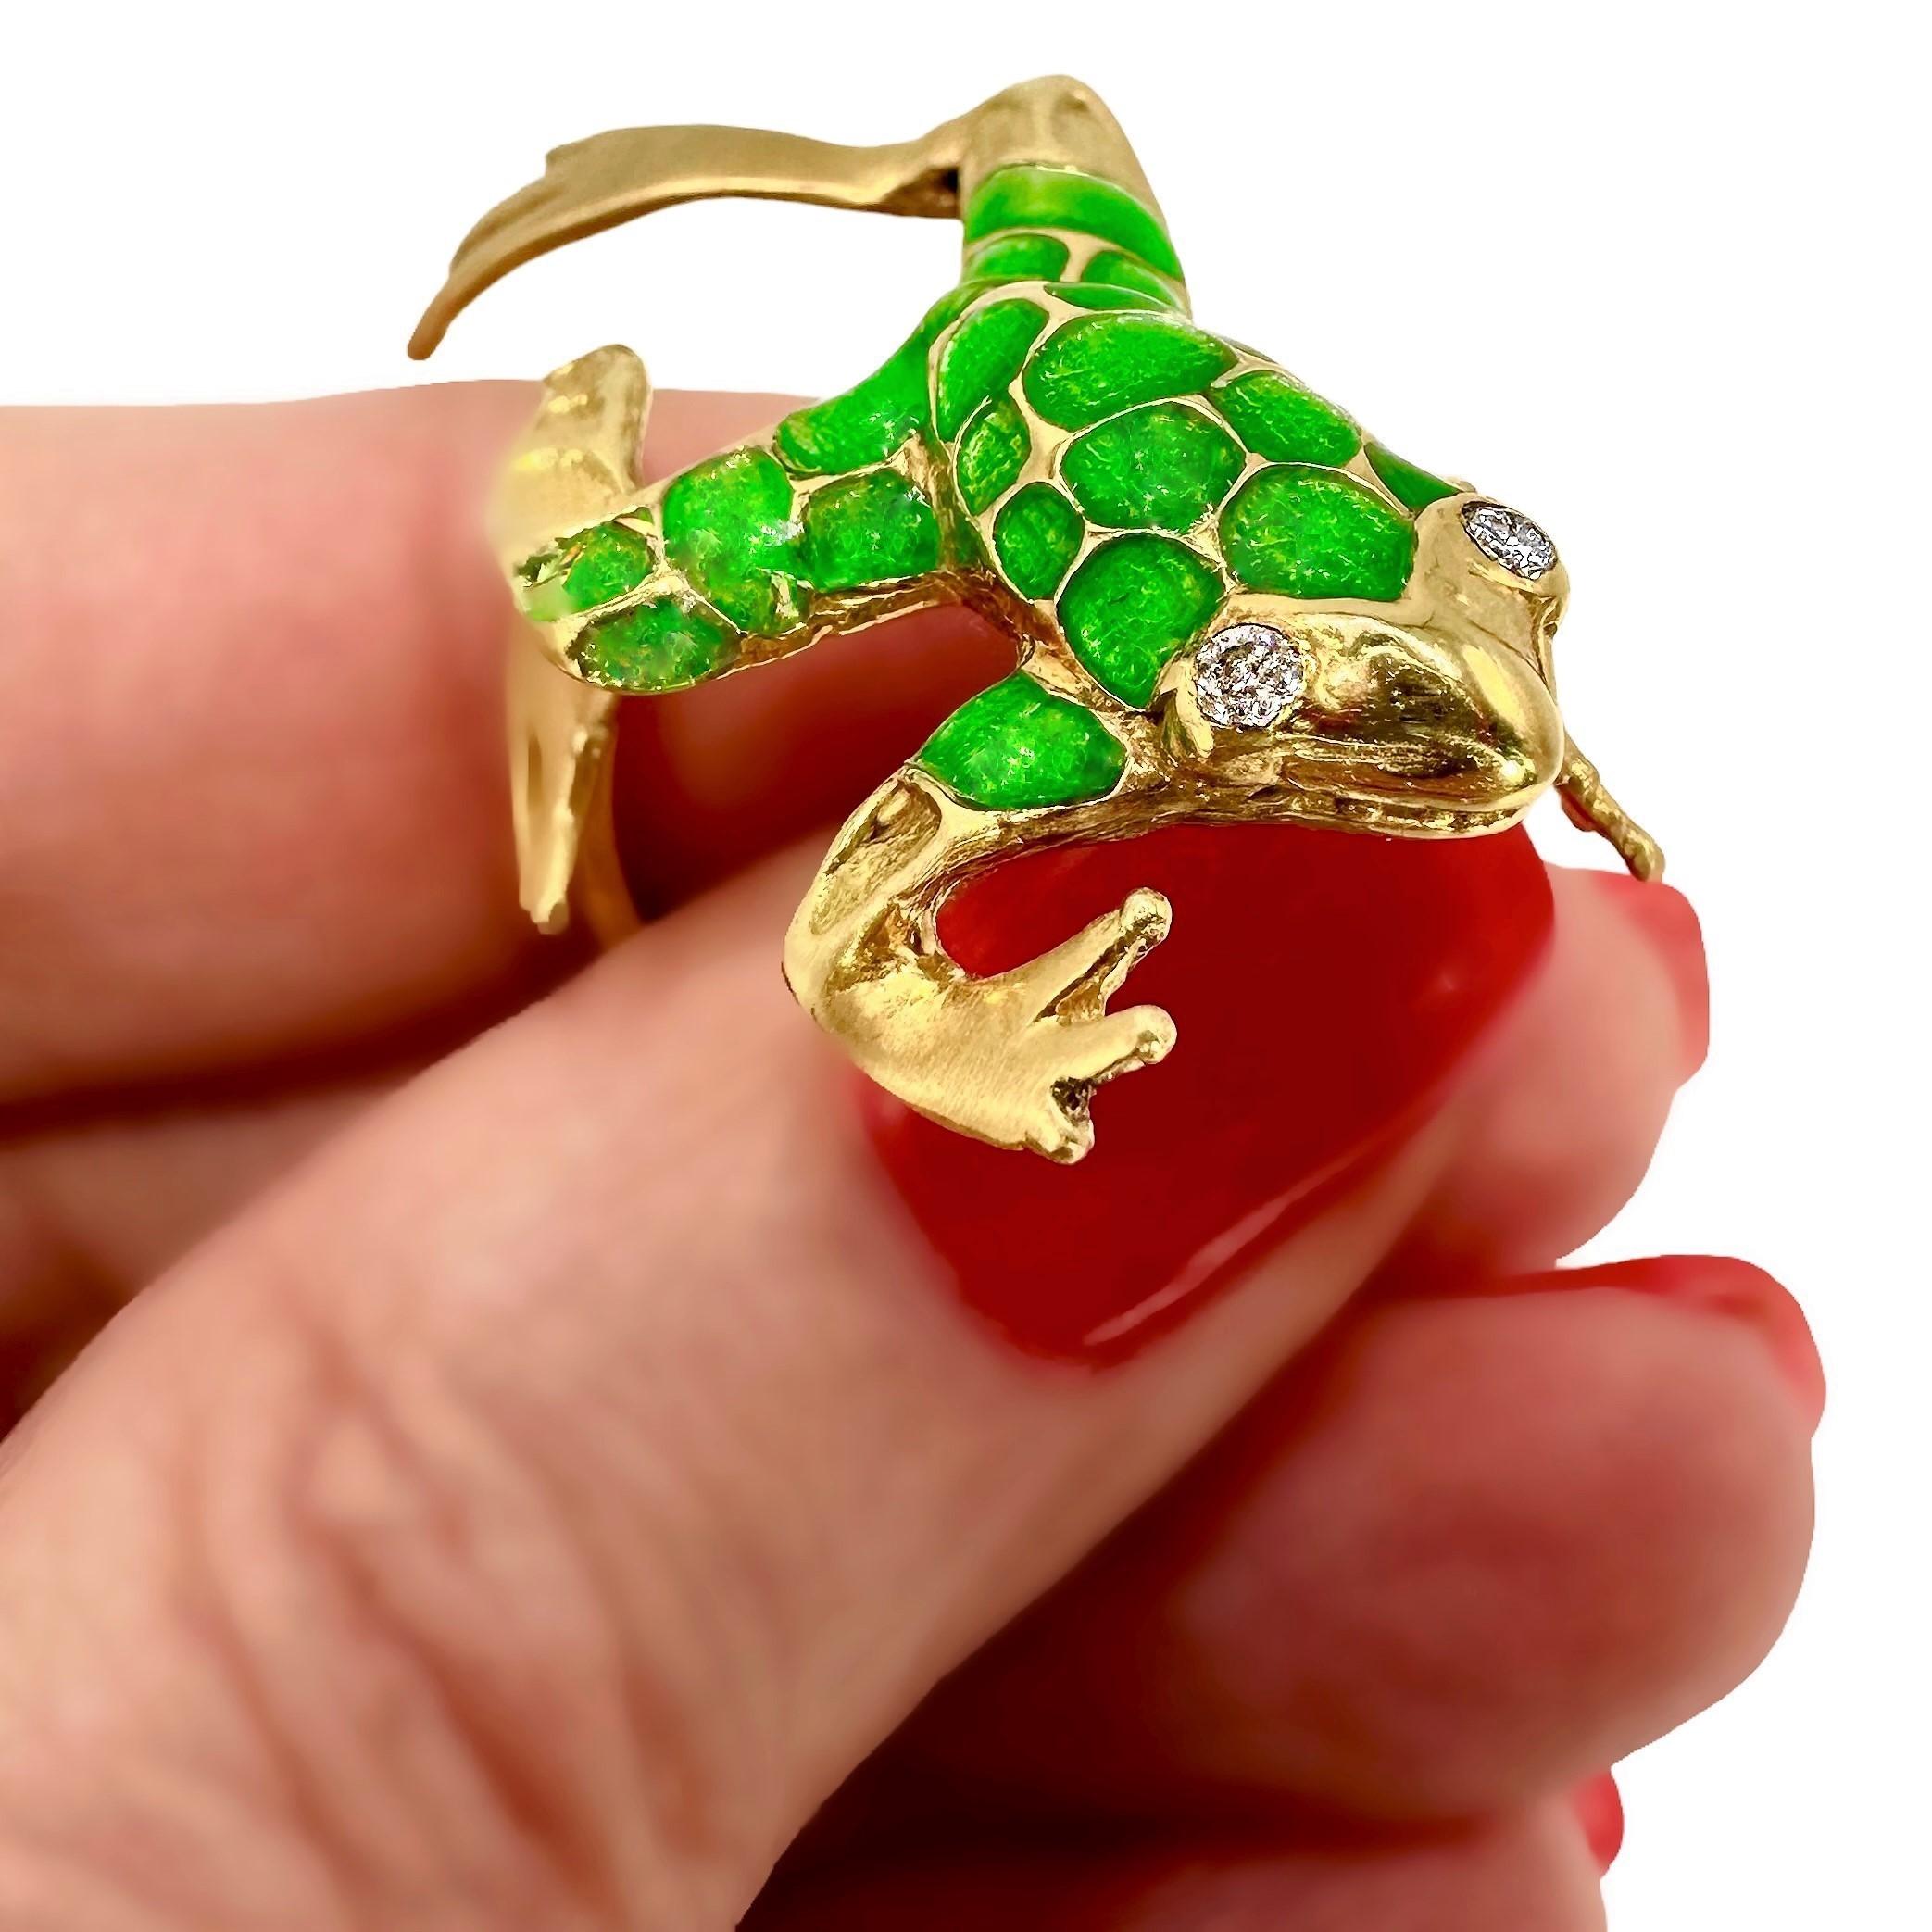 Brilliant Cut Lifelike Frog Motif Ring in 18K Yellow Gold, Green Enamel and Diamonds For Sale